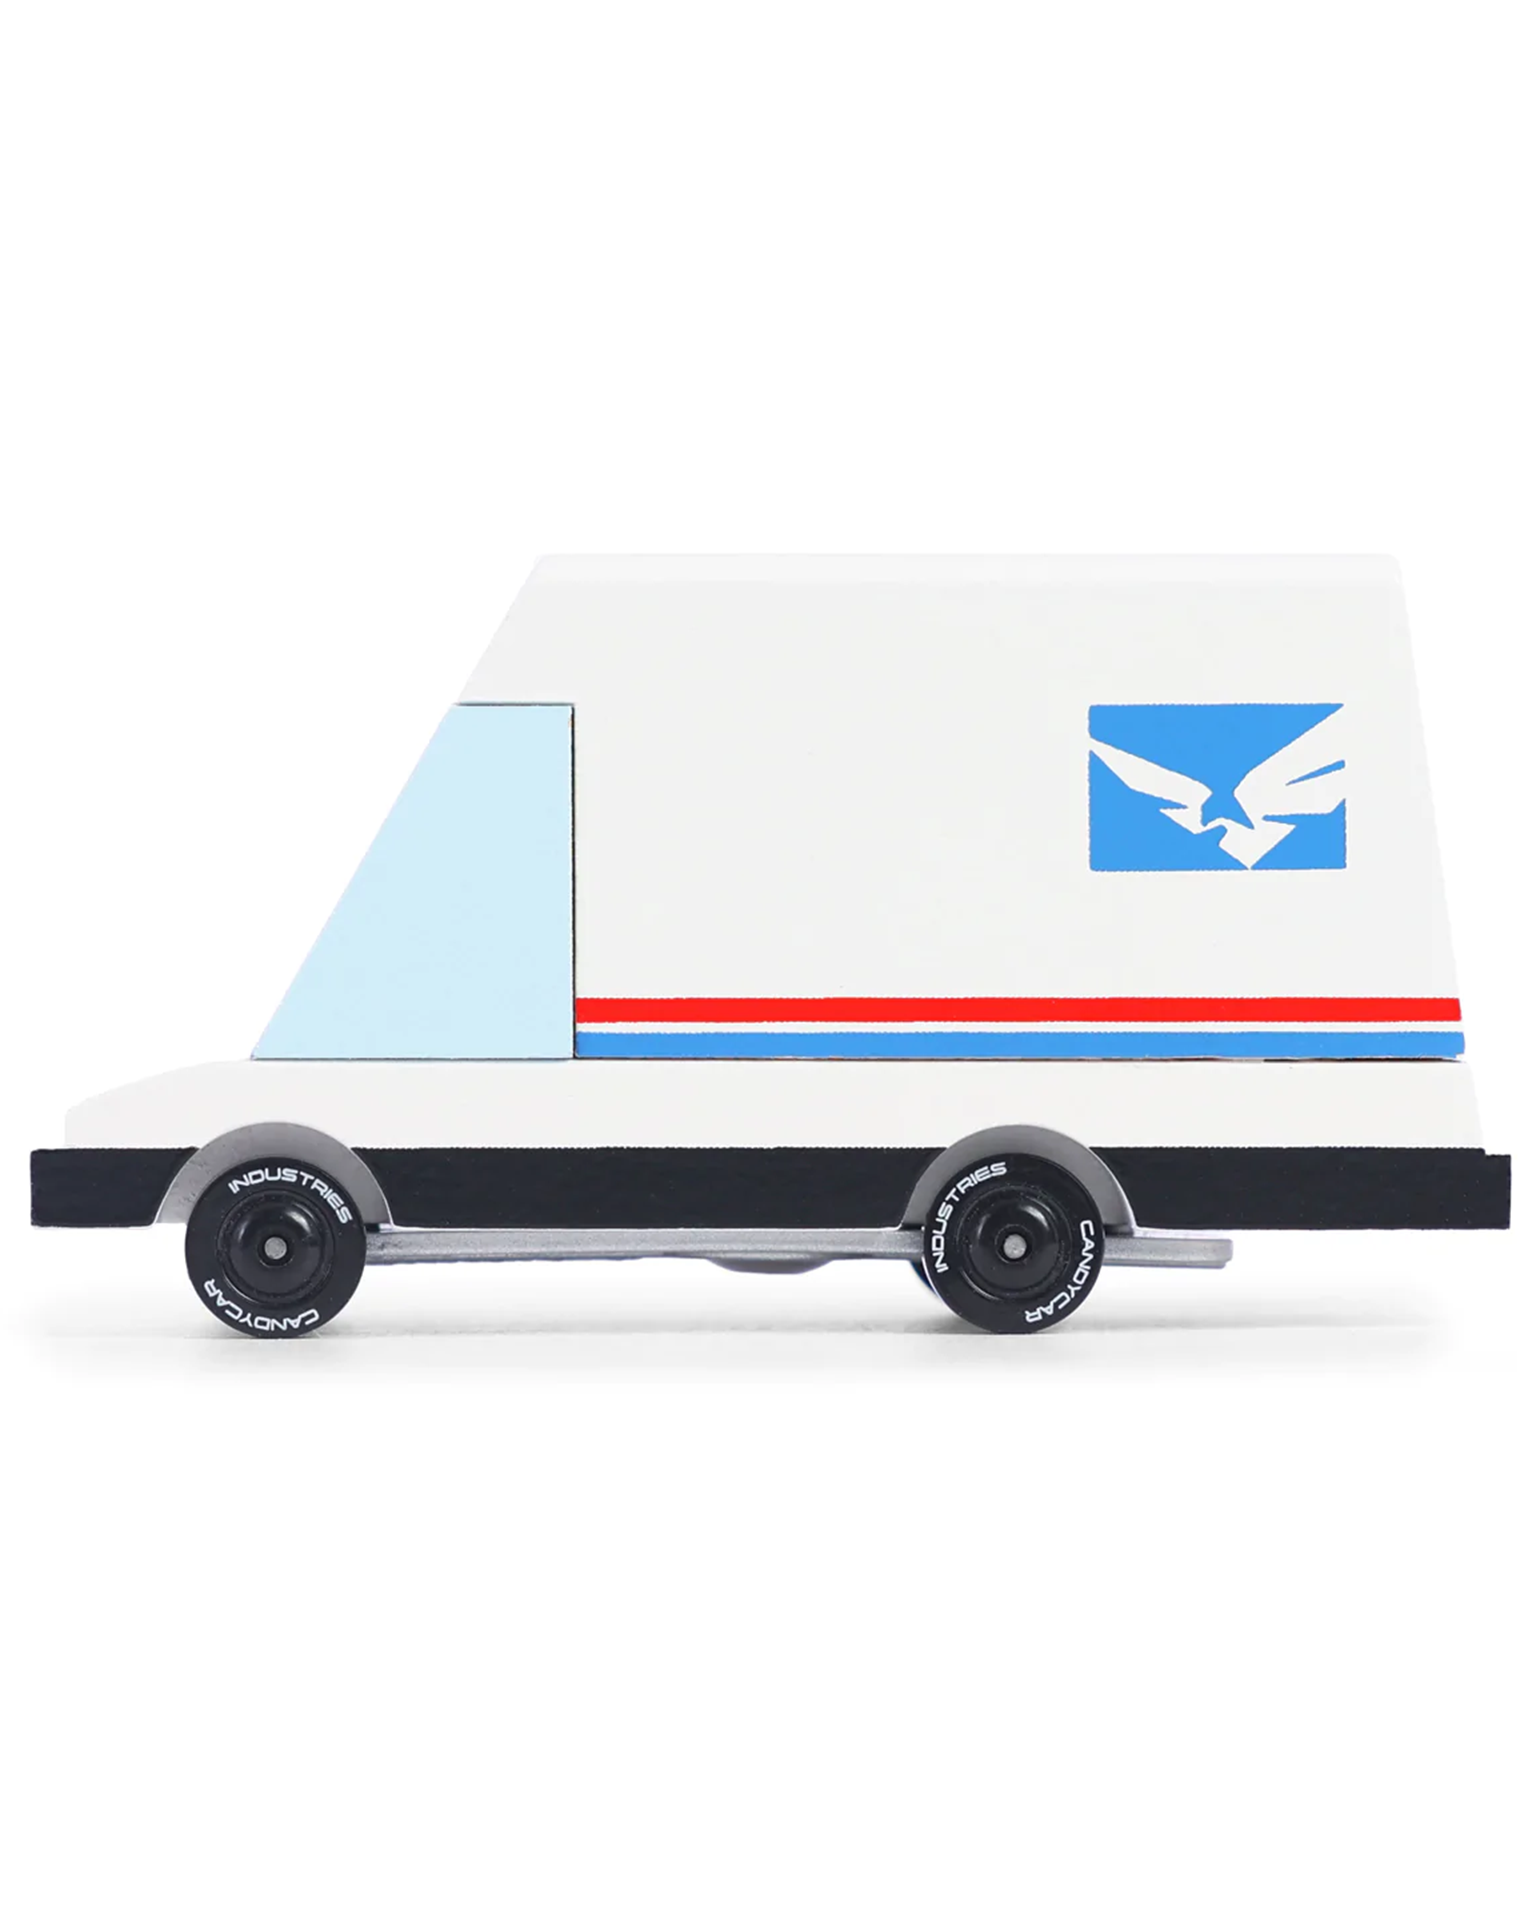 Little candylab play futuristic mail van